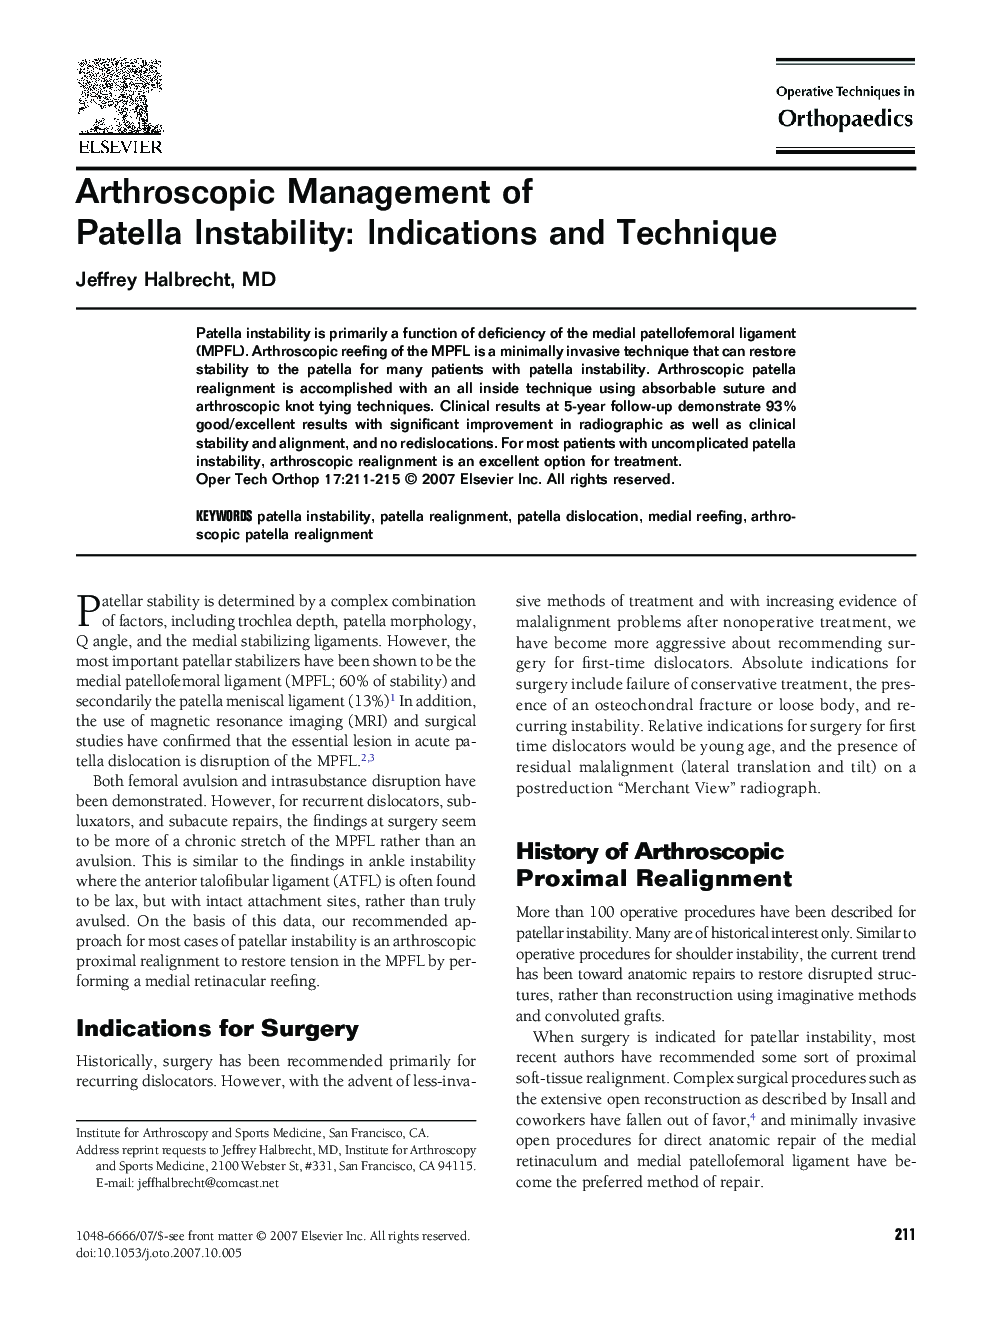 Arthroscopic Management of Patella Instability: Indications and Technique